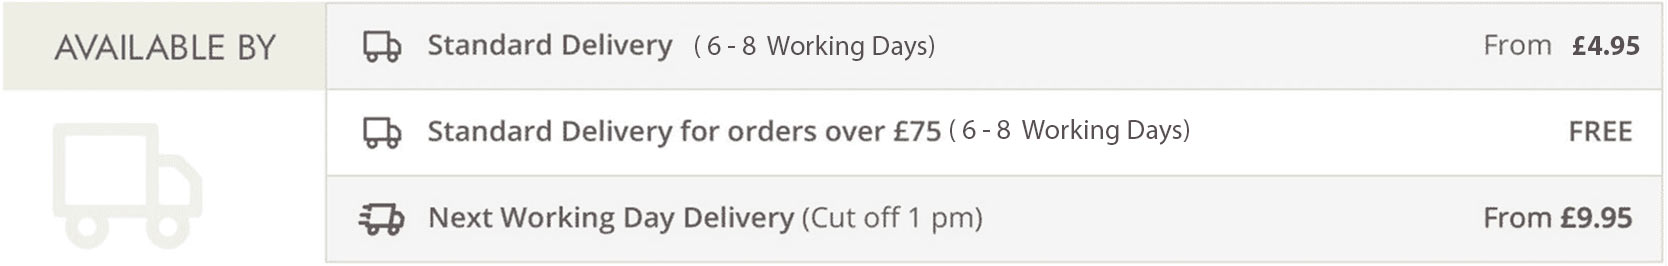 Delivery times 6 - 8 working days with next day delivery